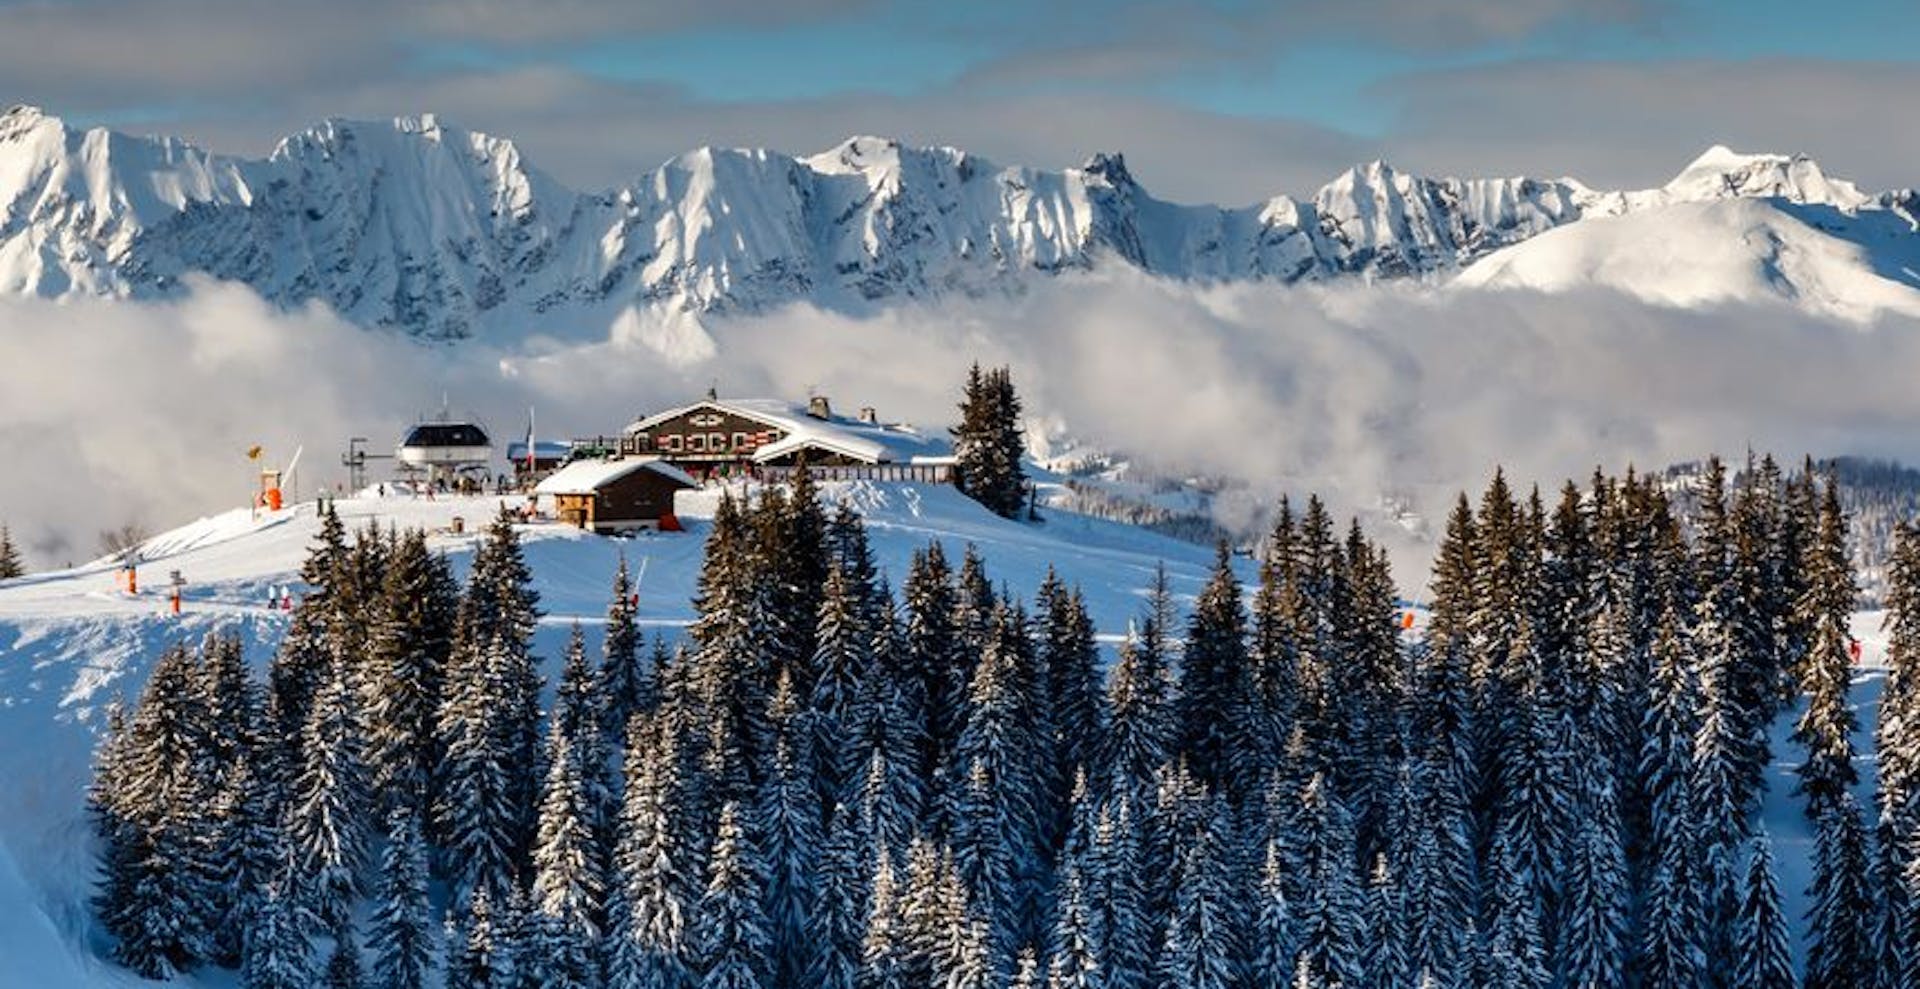 From the quiet slopes to the classic French town, Megève is quite the resort